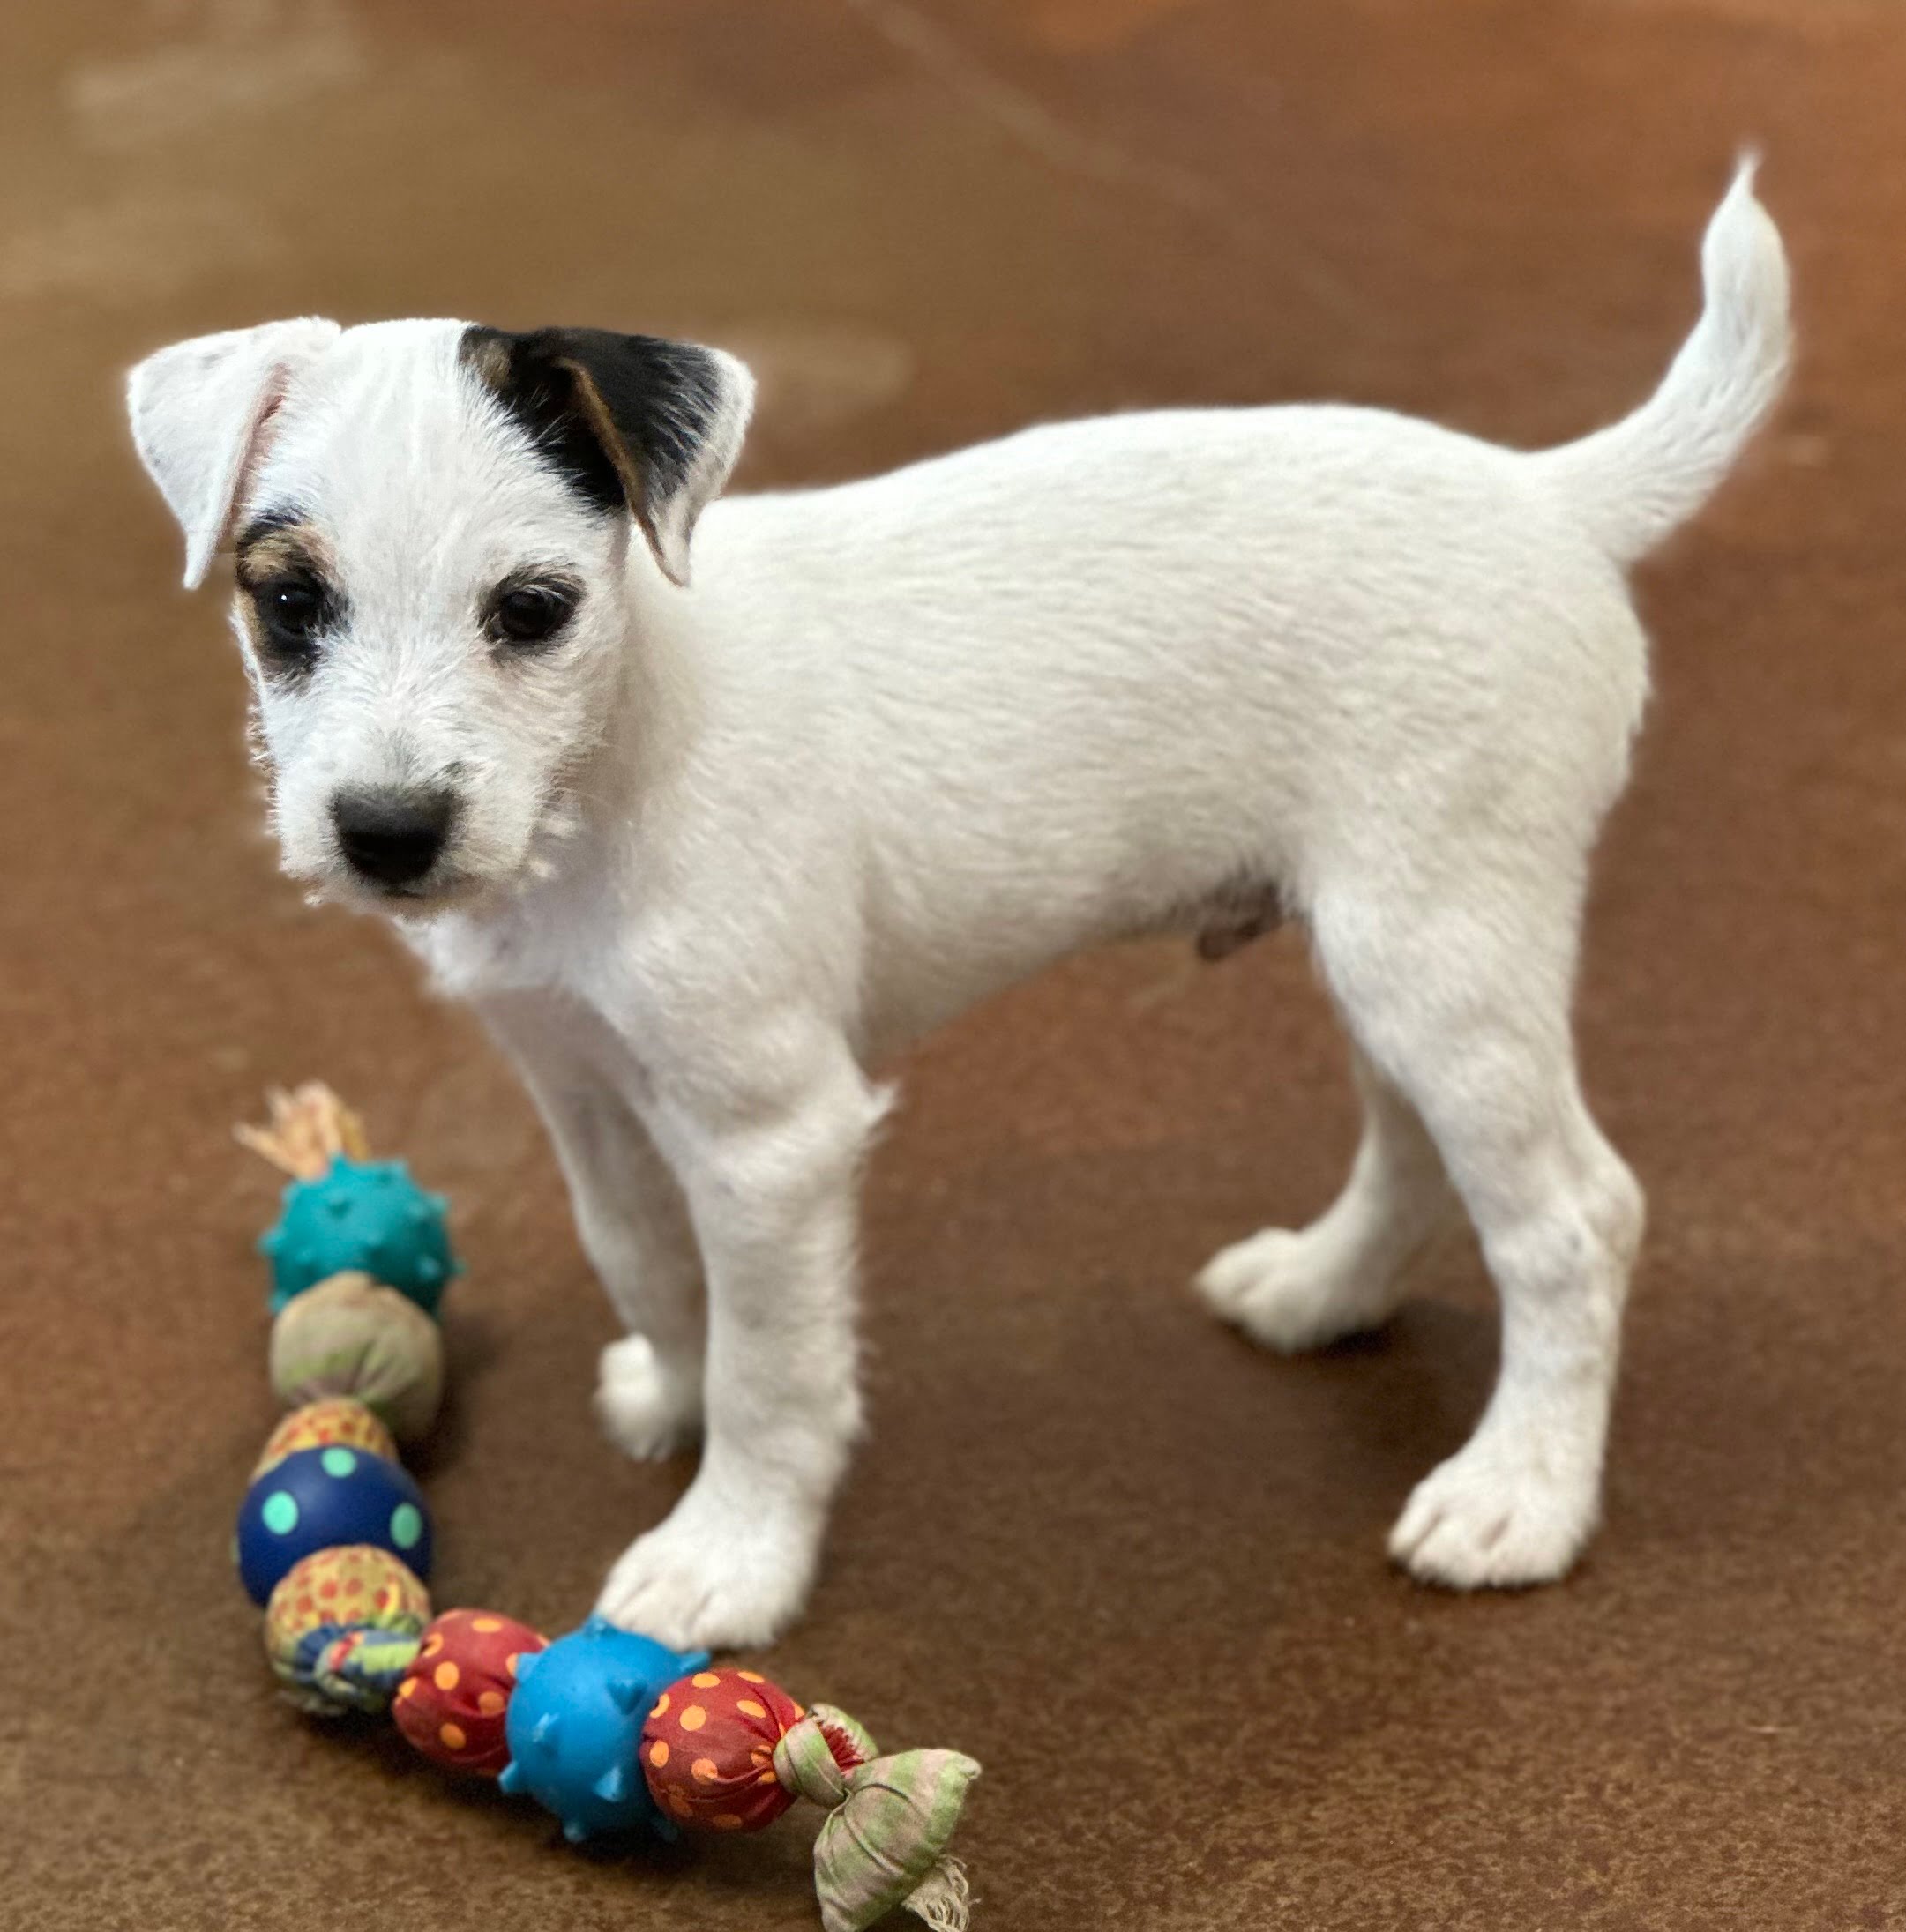 SOLD – Pirate – Marley Male 1 – Tri Broken Male Jack Russell Terrier Puppy For Sale Pete X Marley